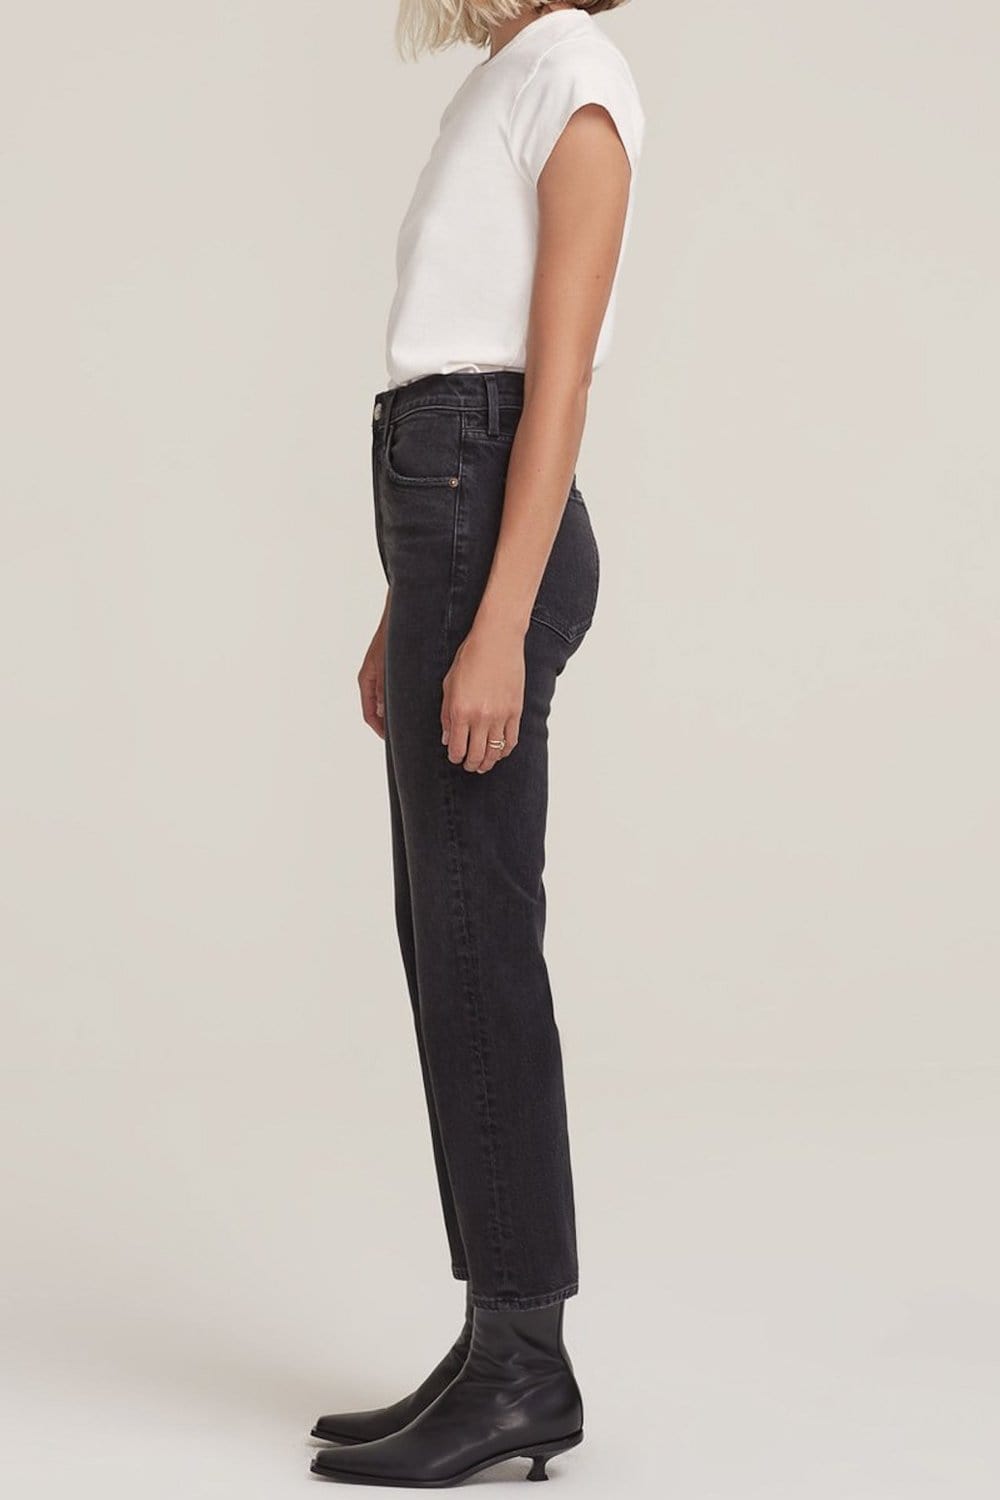 Agolde Wilder Mid Rise Straight Jean Panoramic